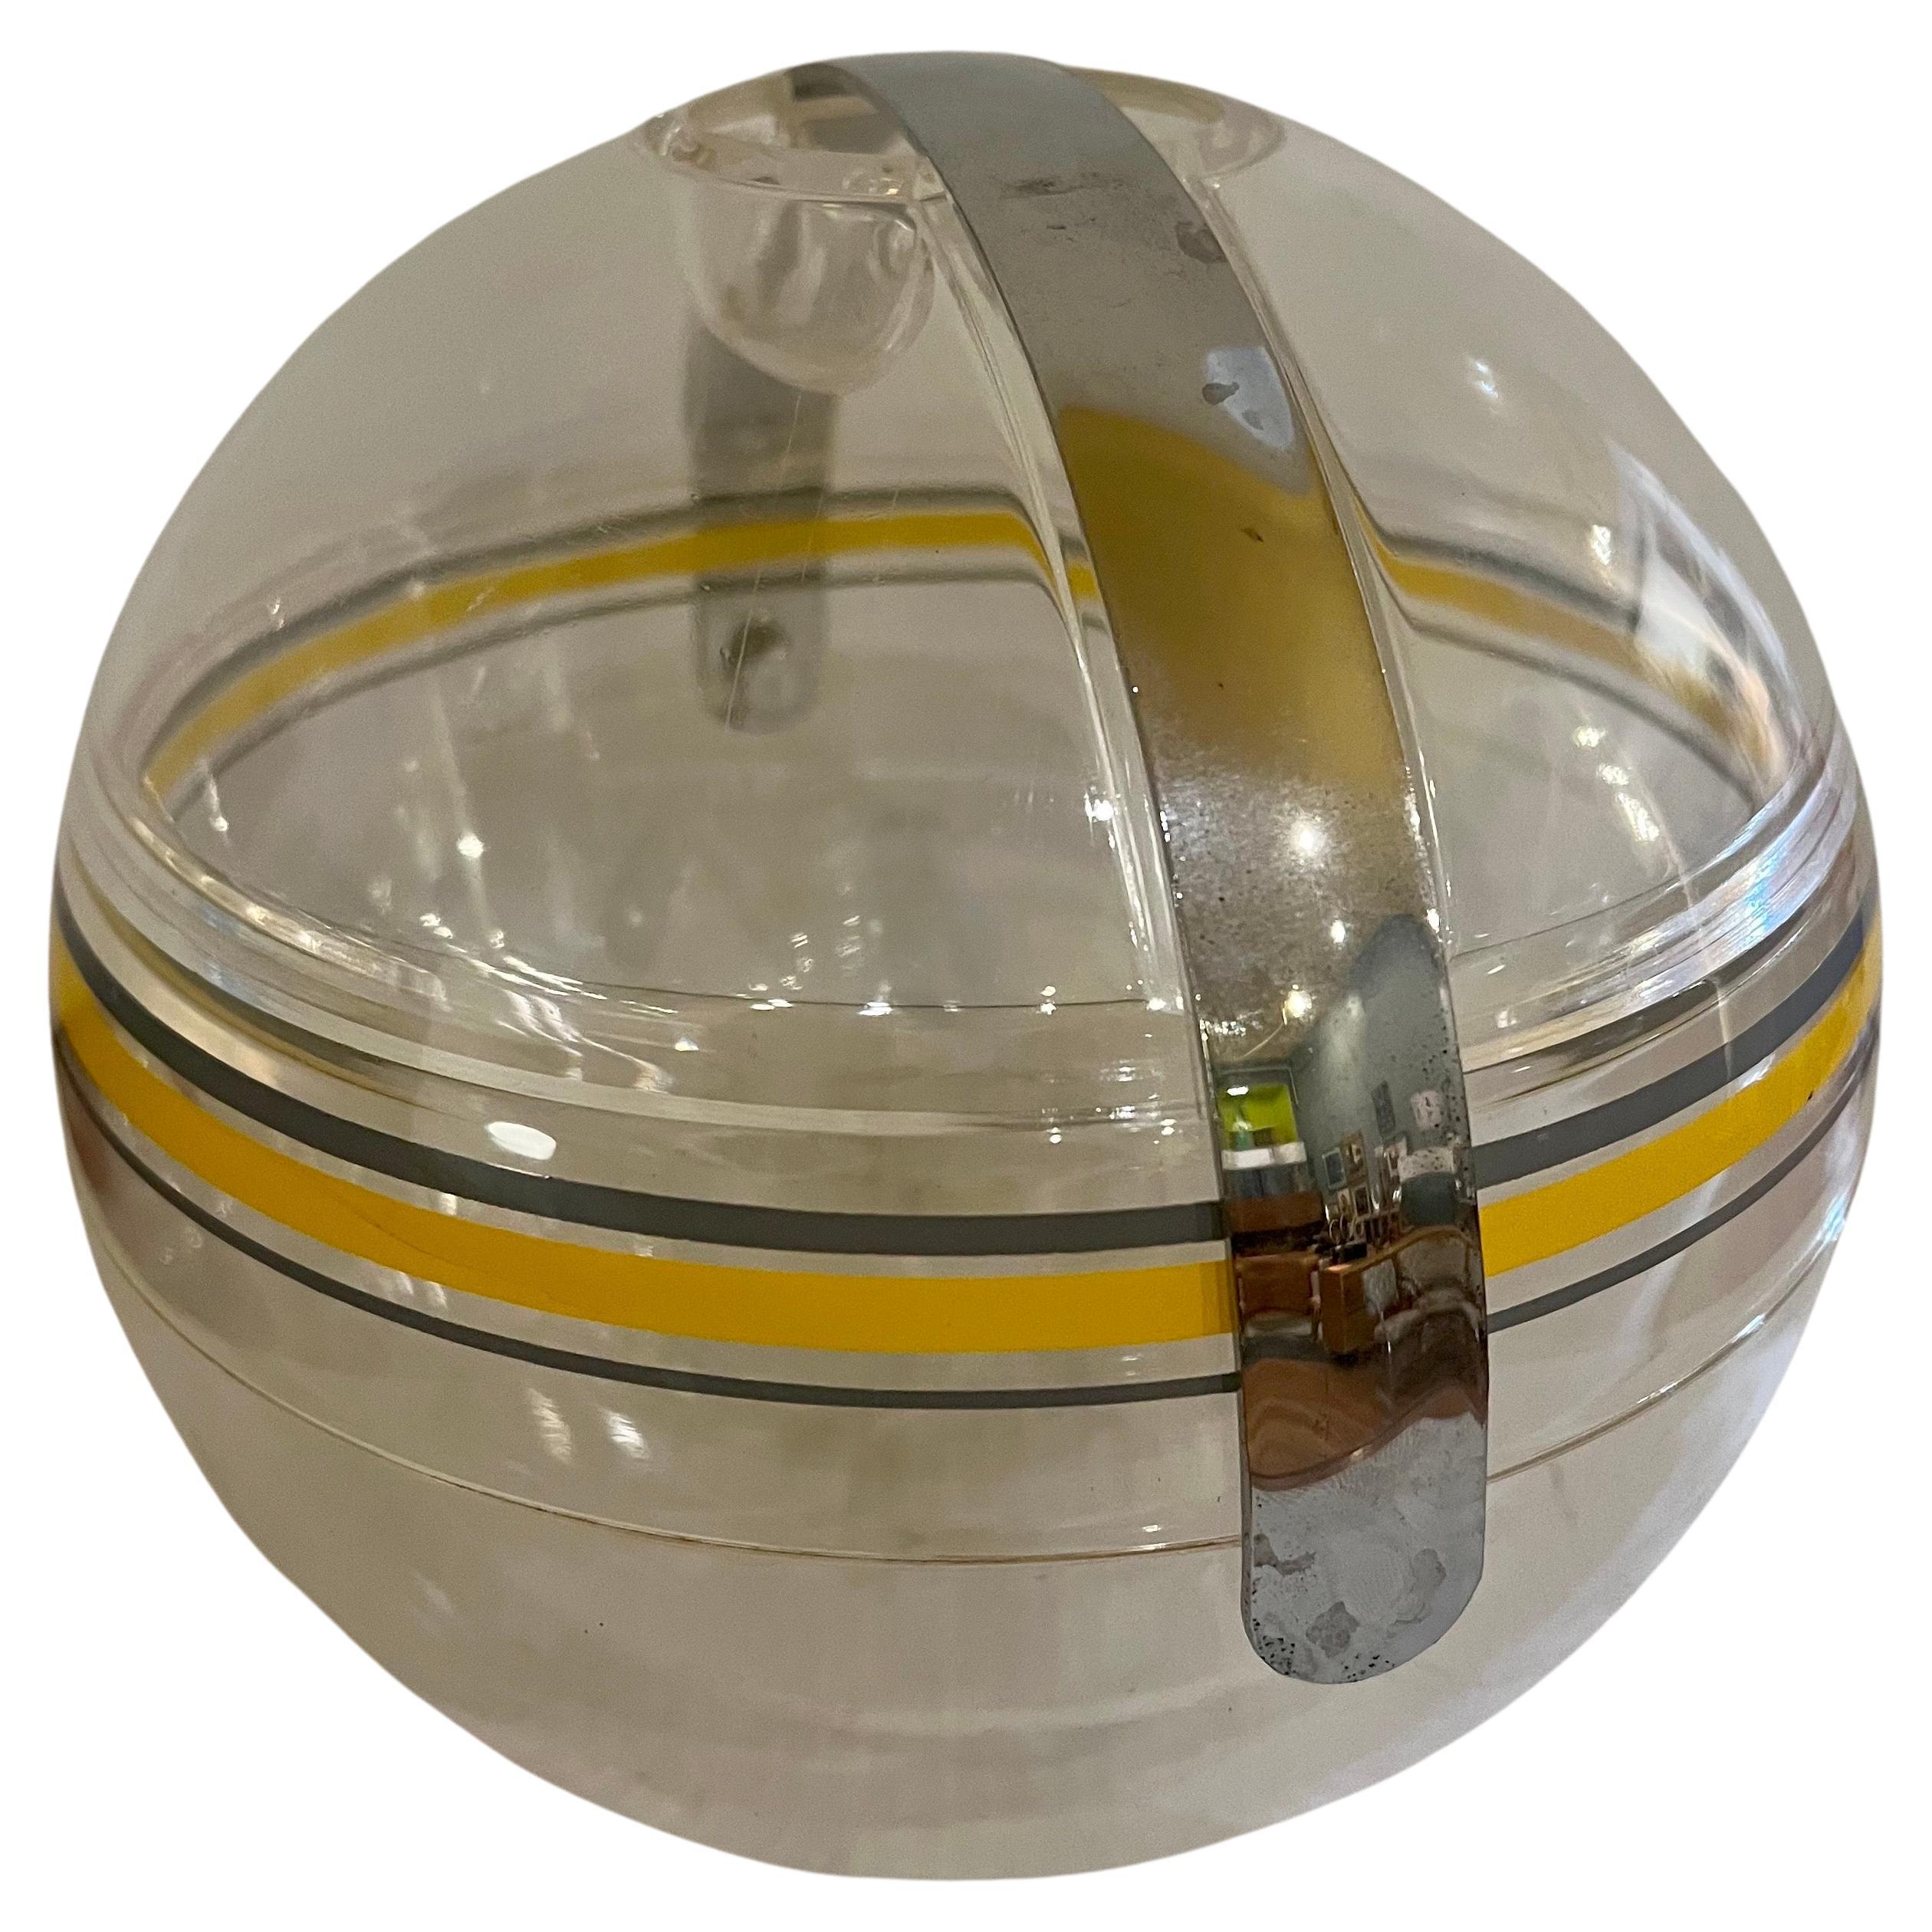 Italian Iconic Space Age Lucite Ice Bucket Designed by Paolo Tilche for Guzzini Italy